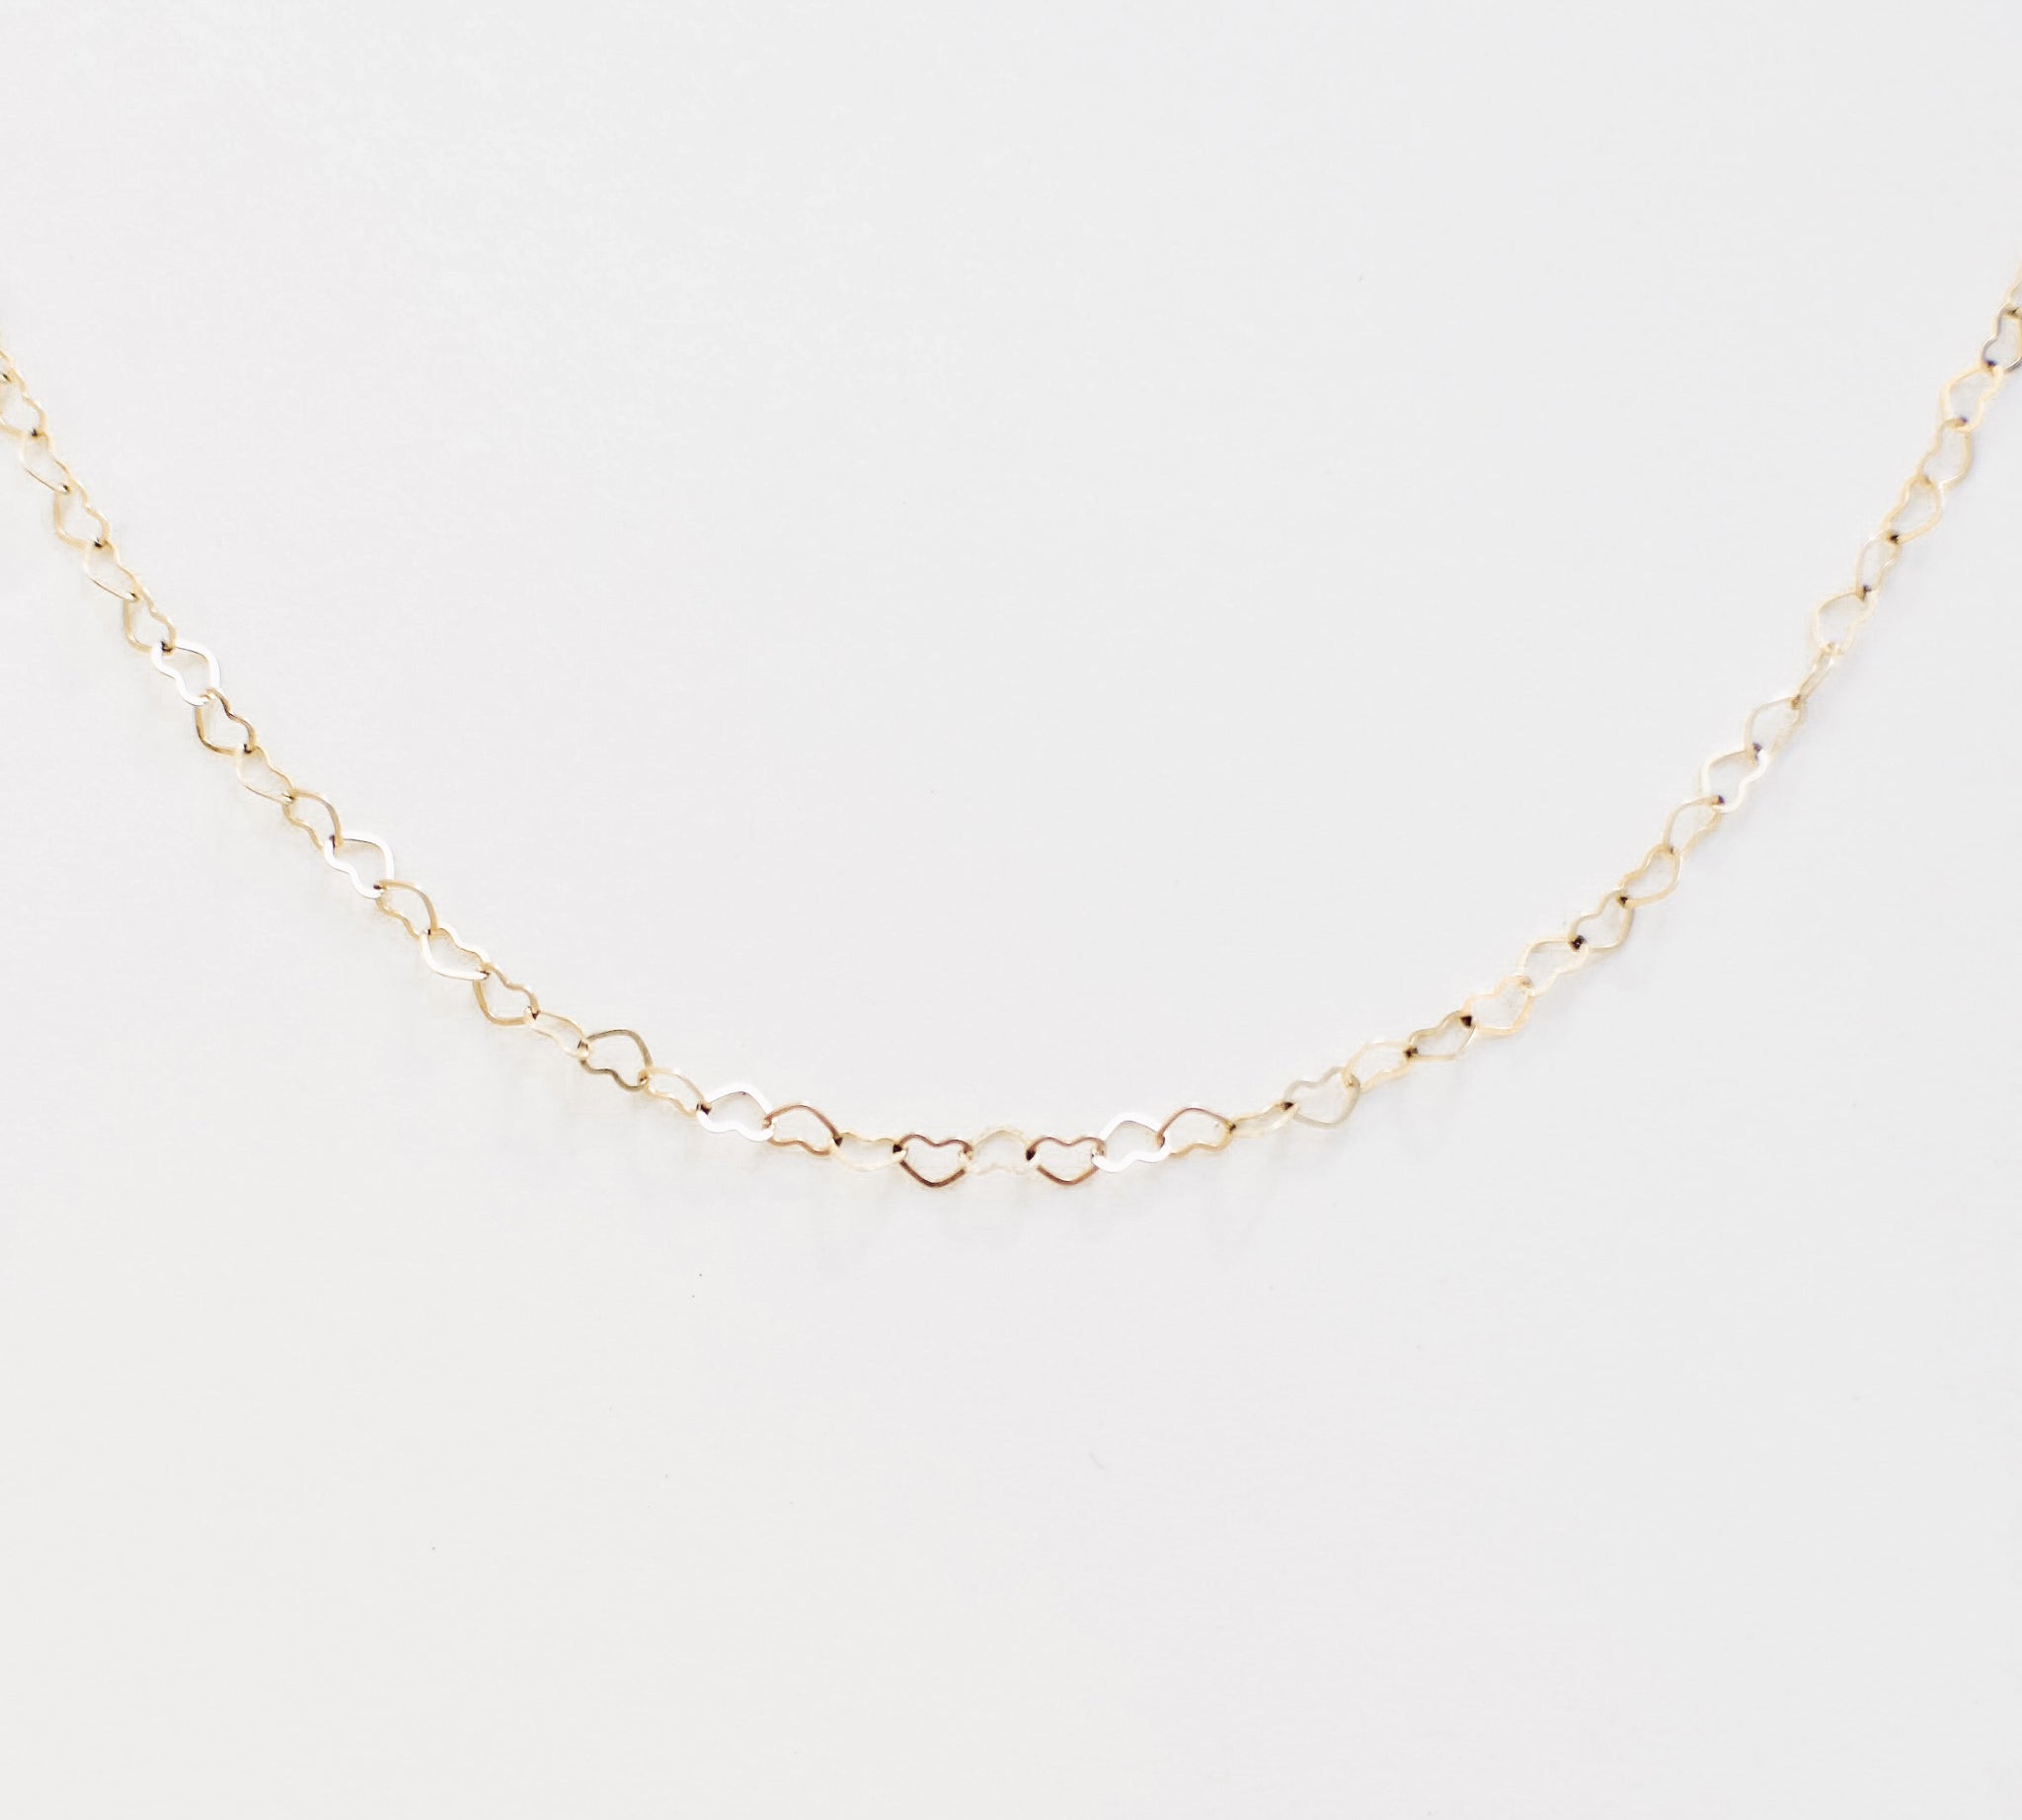 Heart to Heart Necklace, product image